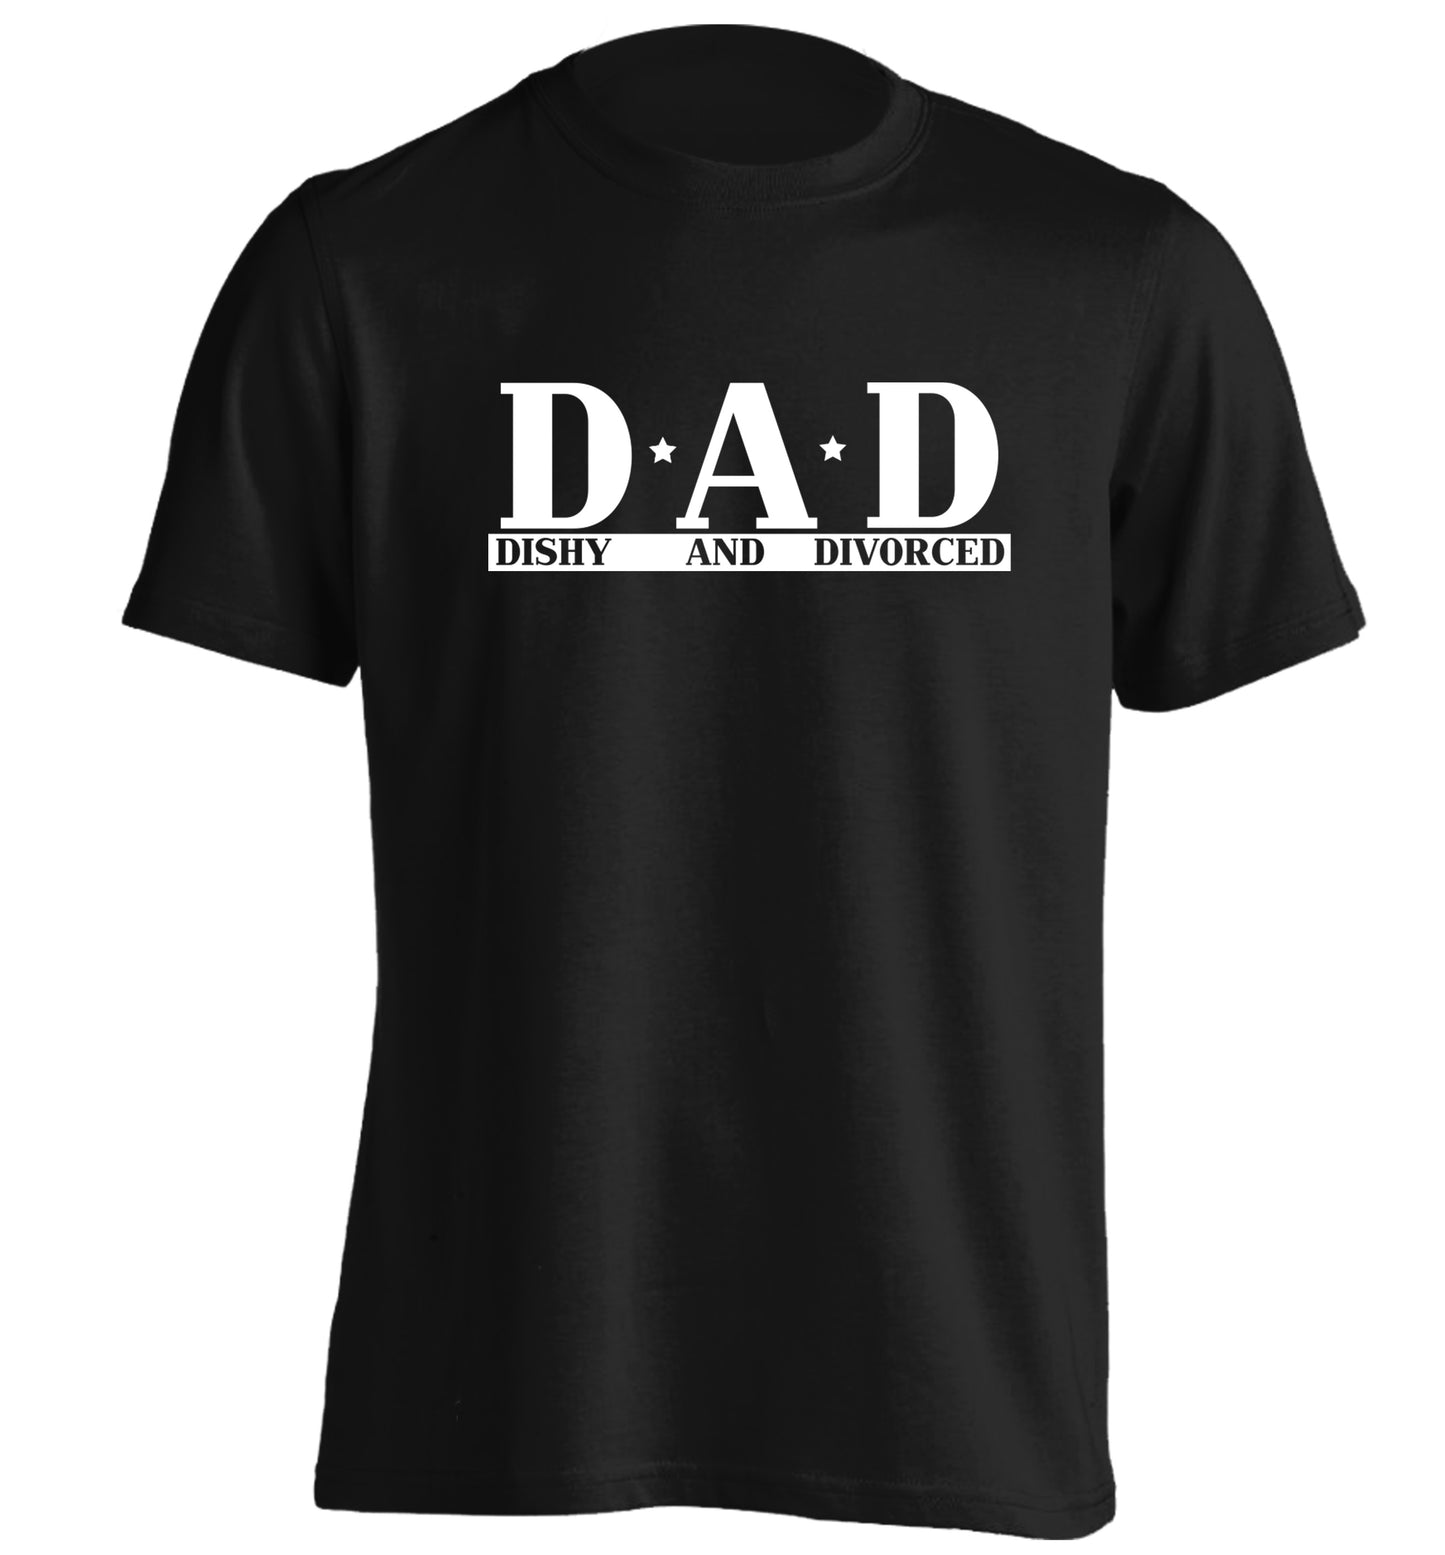 D.A.D meaning Dishy and Divorced adults unisex black Tshirt 2XL